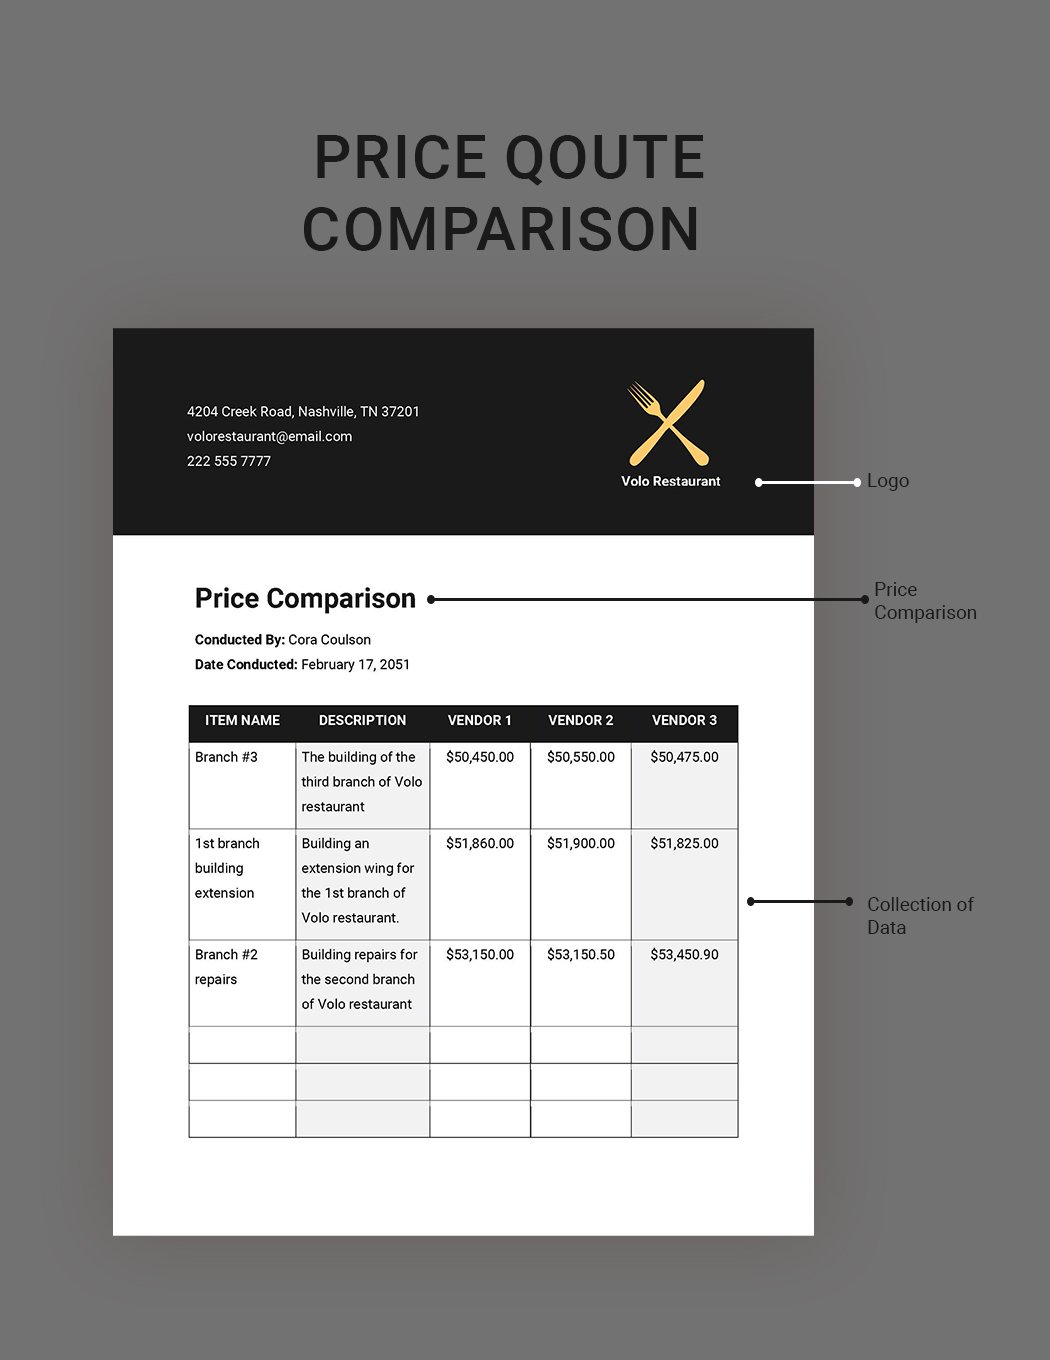 Price Quote Comparison Template Download in Word, Google Docs